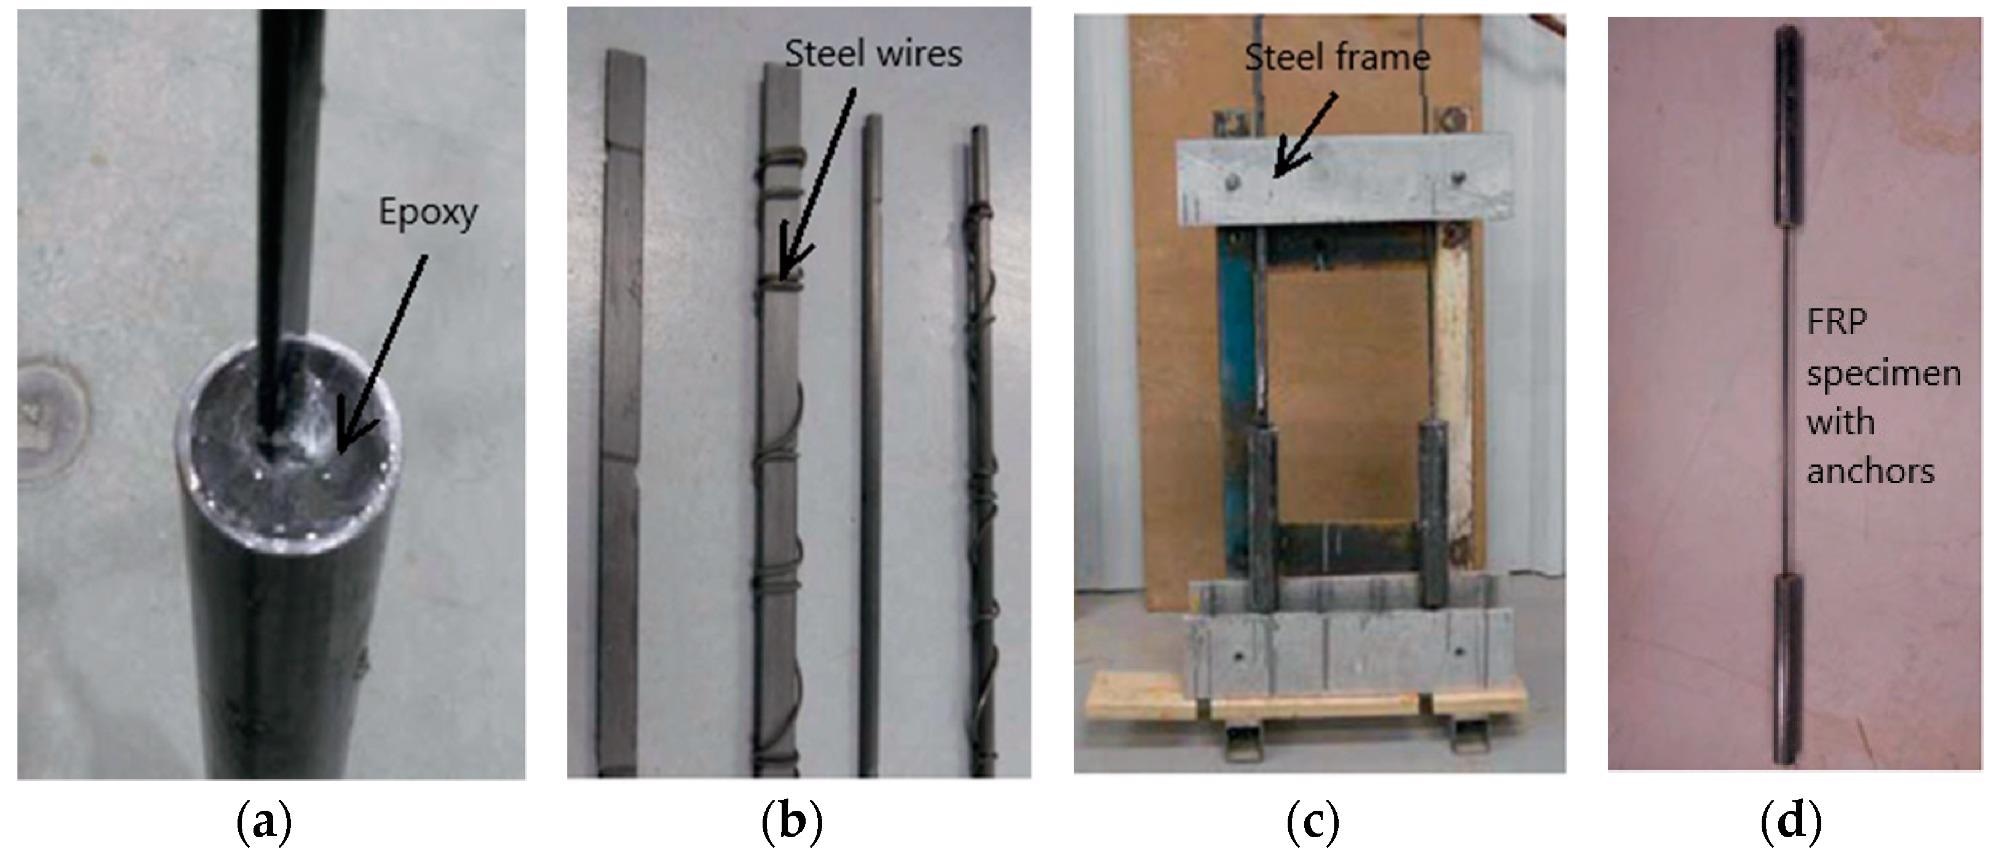 Fabrication of anchor system for FRP specimens indicating (a) epoxy filling, (b) steel wires, (c) steel frame, and (d) test specimen.